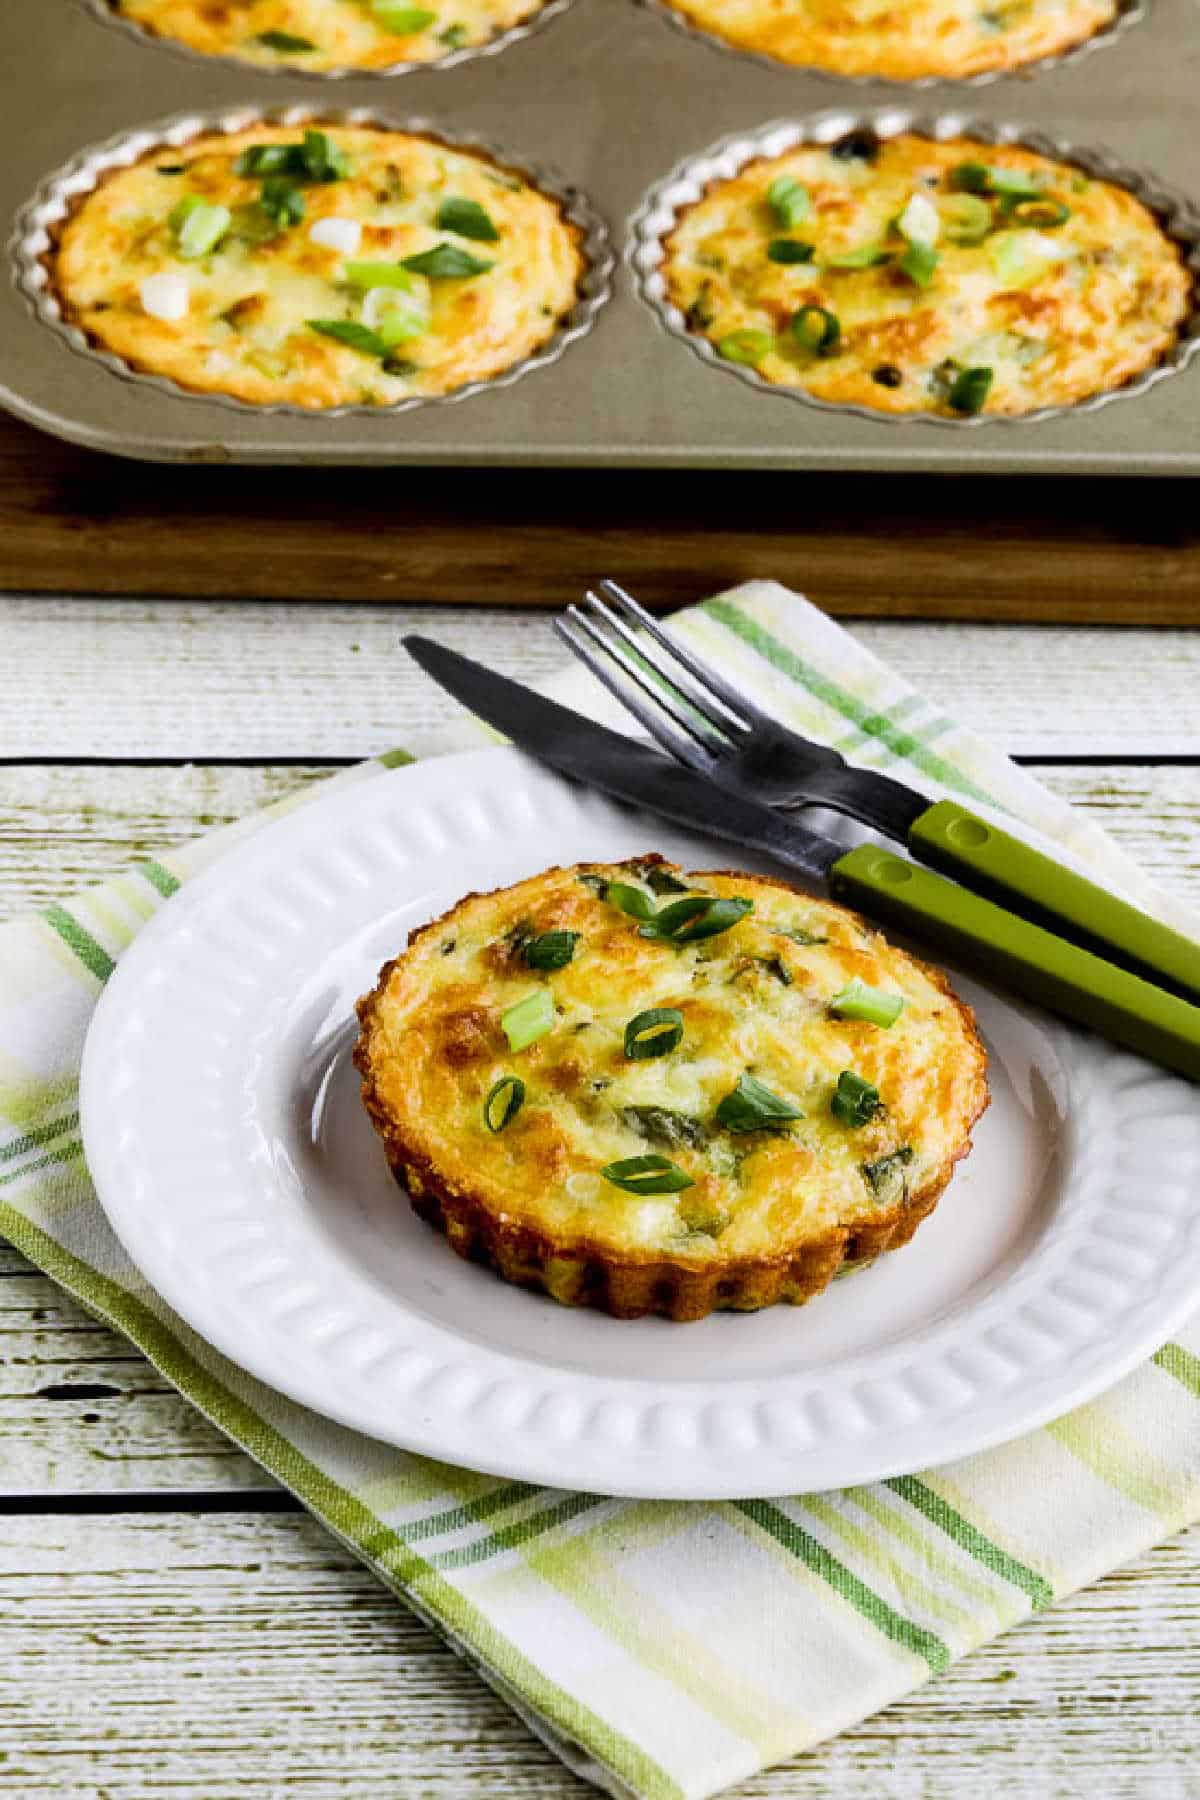 Zucchini Breakfast Tart shown on serving plate with tart pan in background, farther away